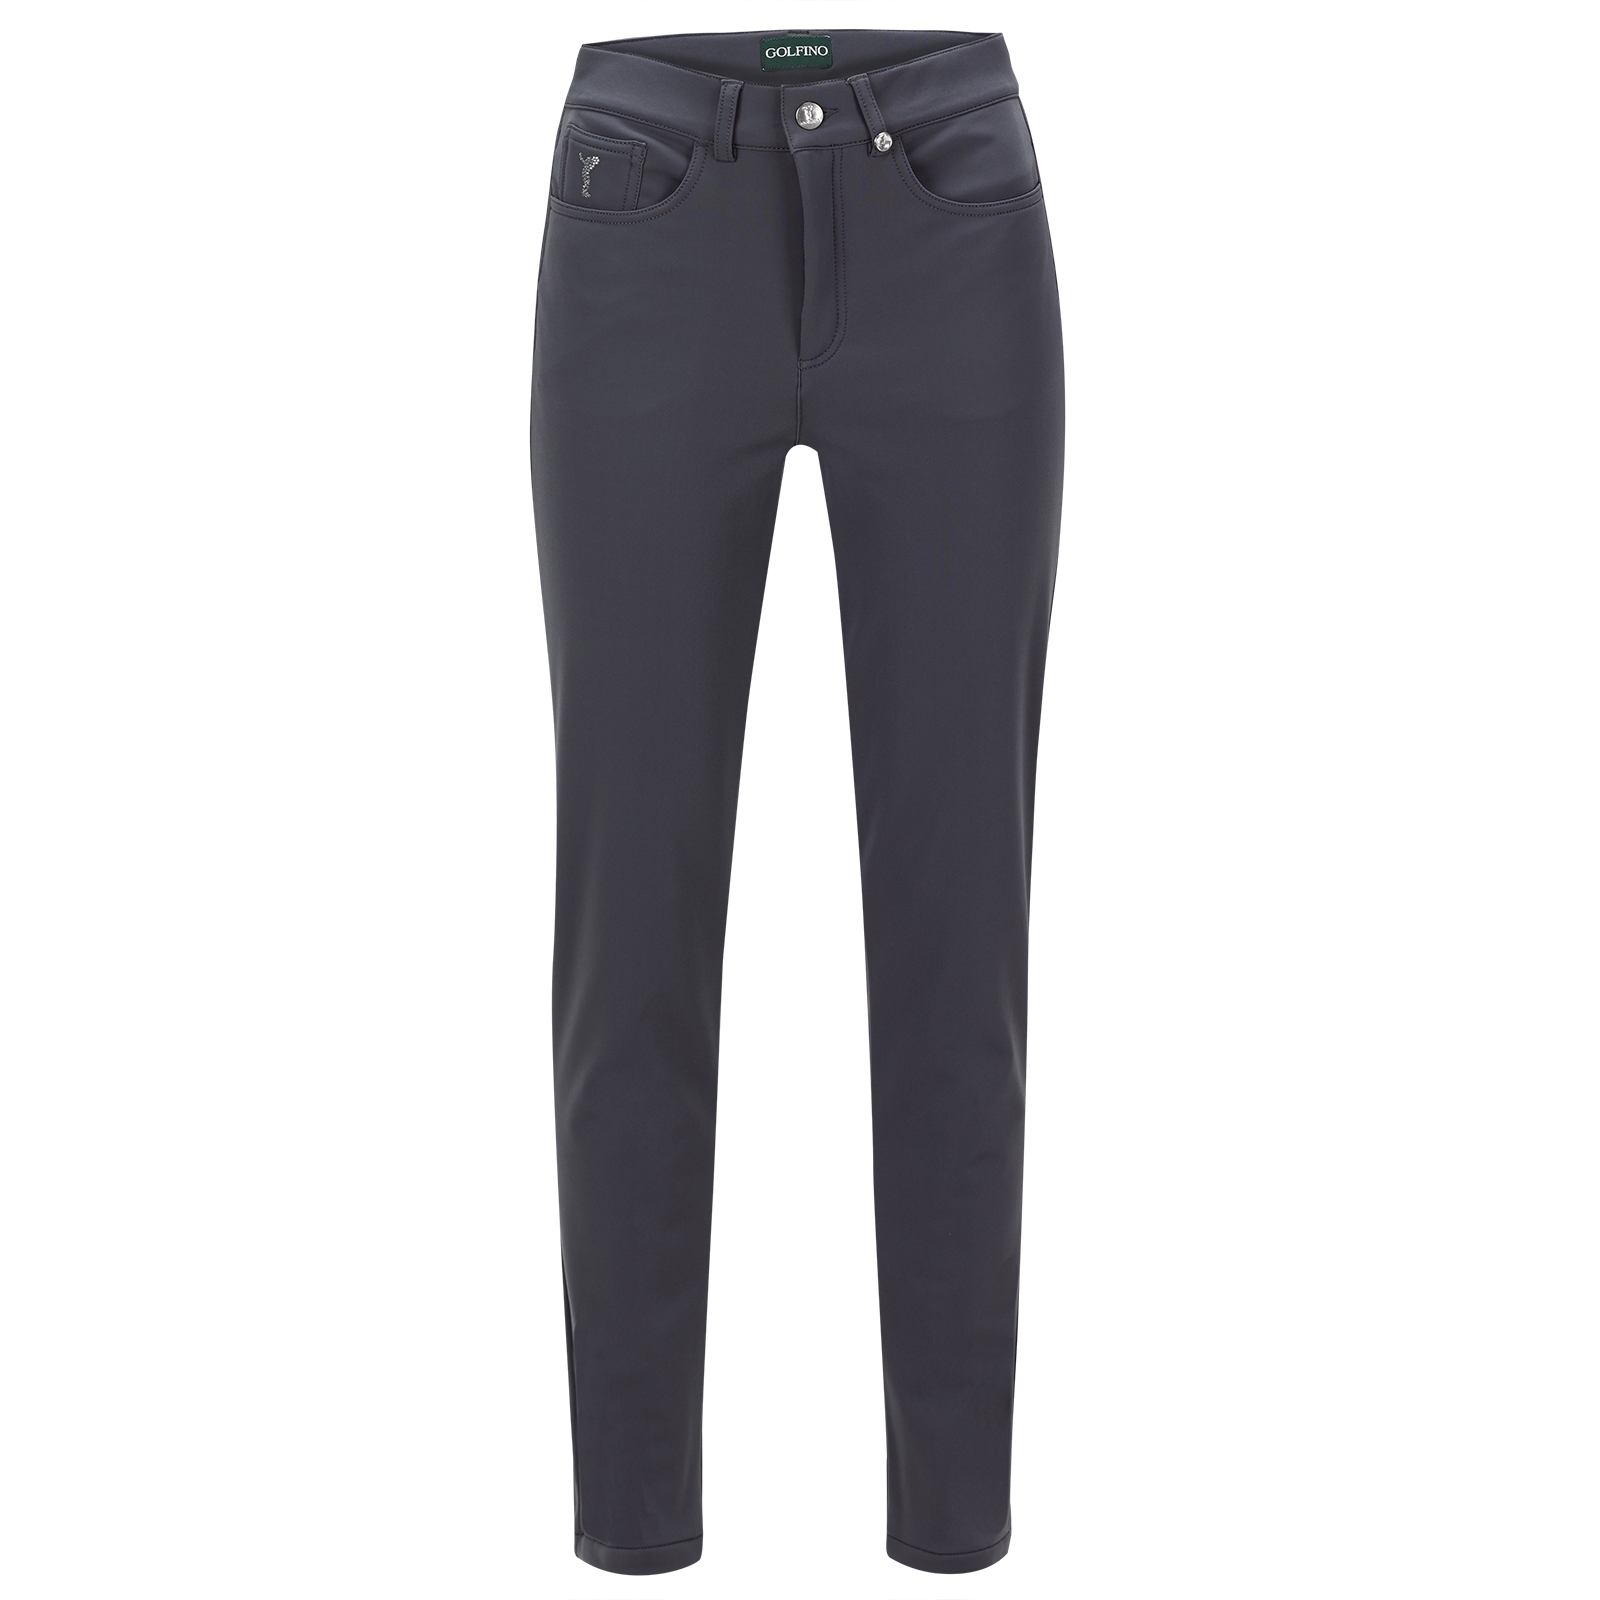 Ladies Winter Power 7/8 golf trouser in slim fit and 4-way stretch